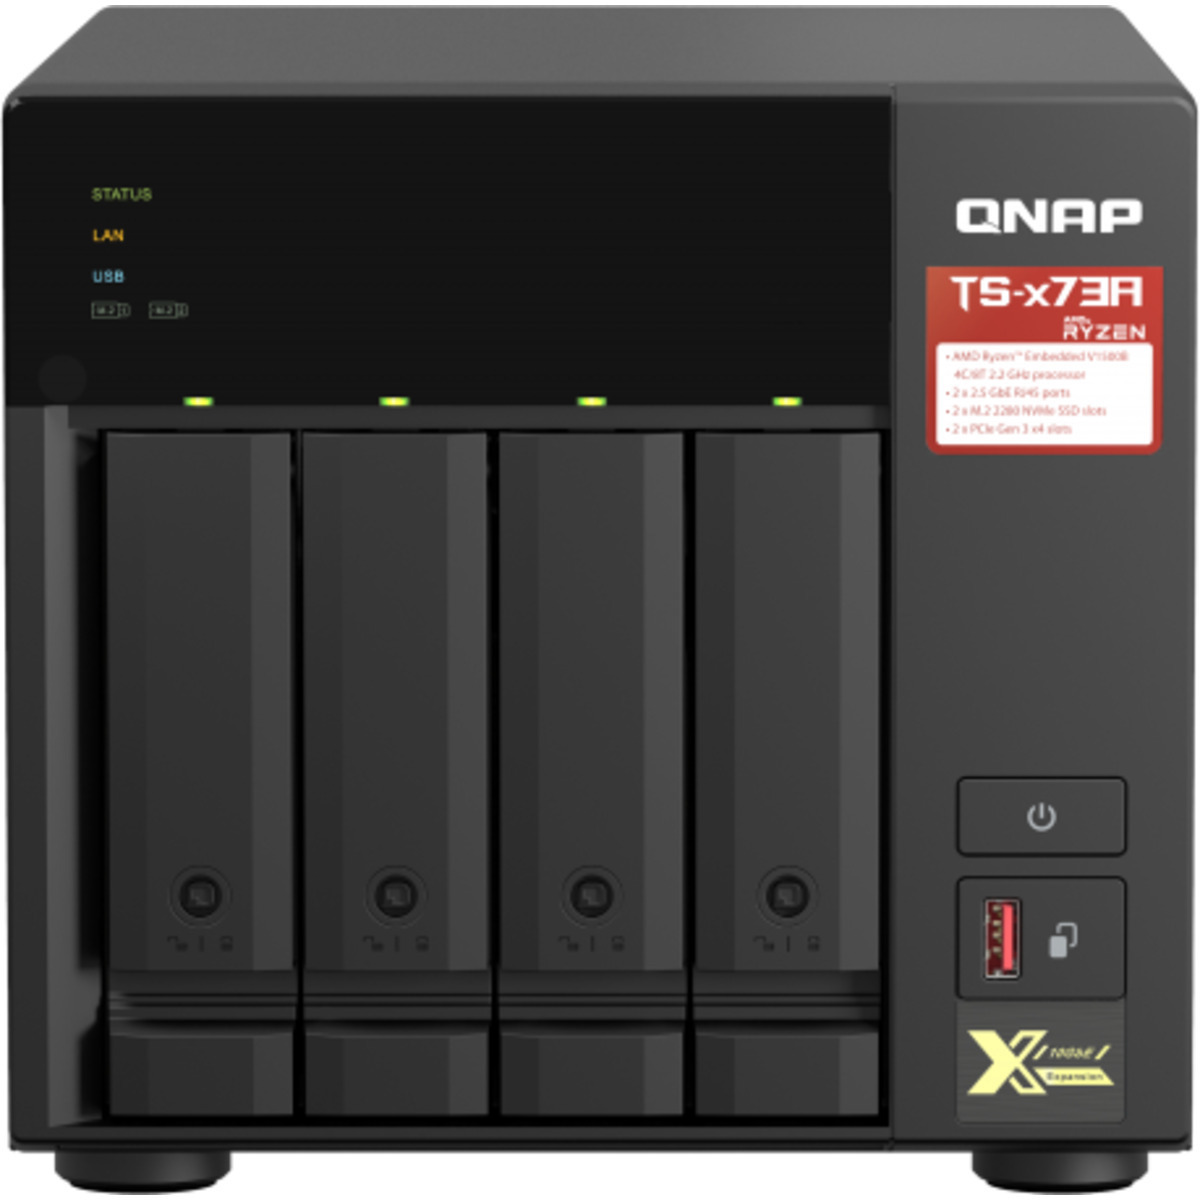 QNAP TS-473A 48tb 4-Bay Desktop Multimedia / Power User / Business NAS - Network Attached Storage Device 4x12tb Seagate IronWolf Pro ST12000NT001 3.5 7200rpm SATA 6Gb/s HDD NAS Class Drives Installed - Burn-In Tested - ON SALE TS-473A